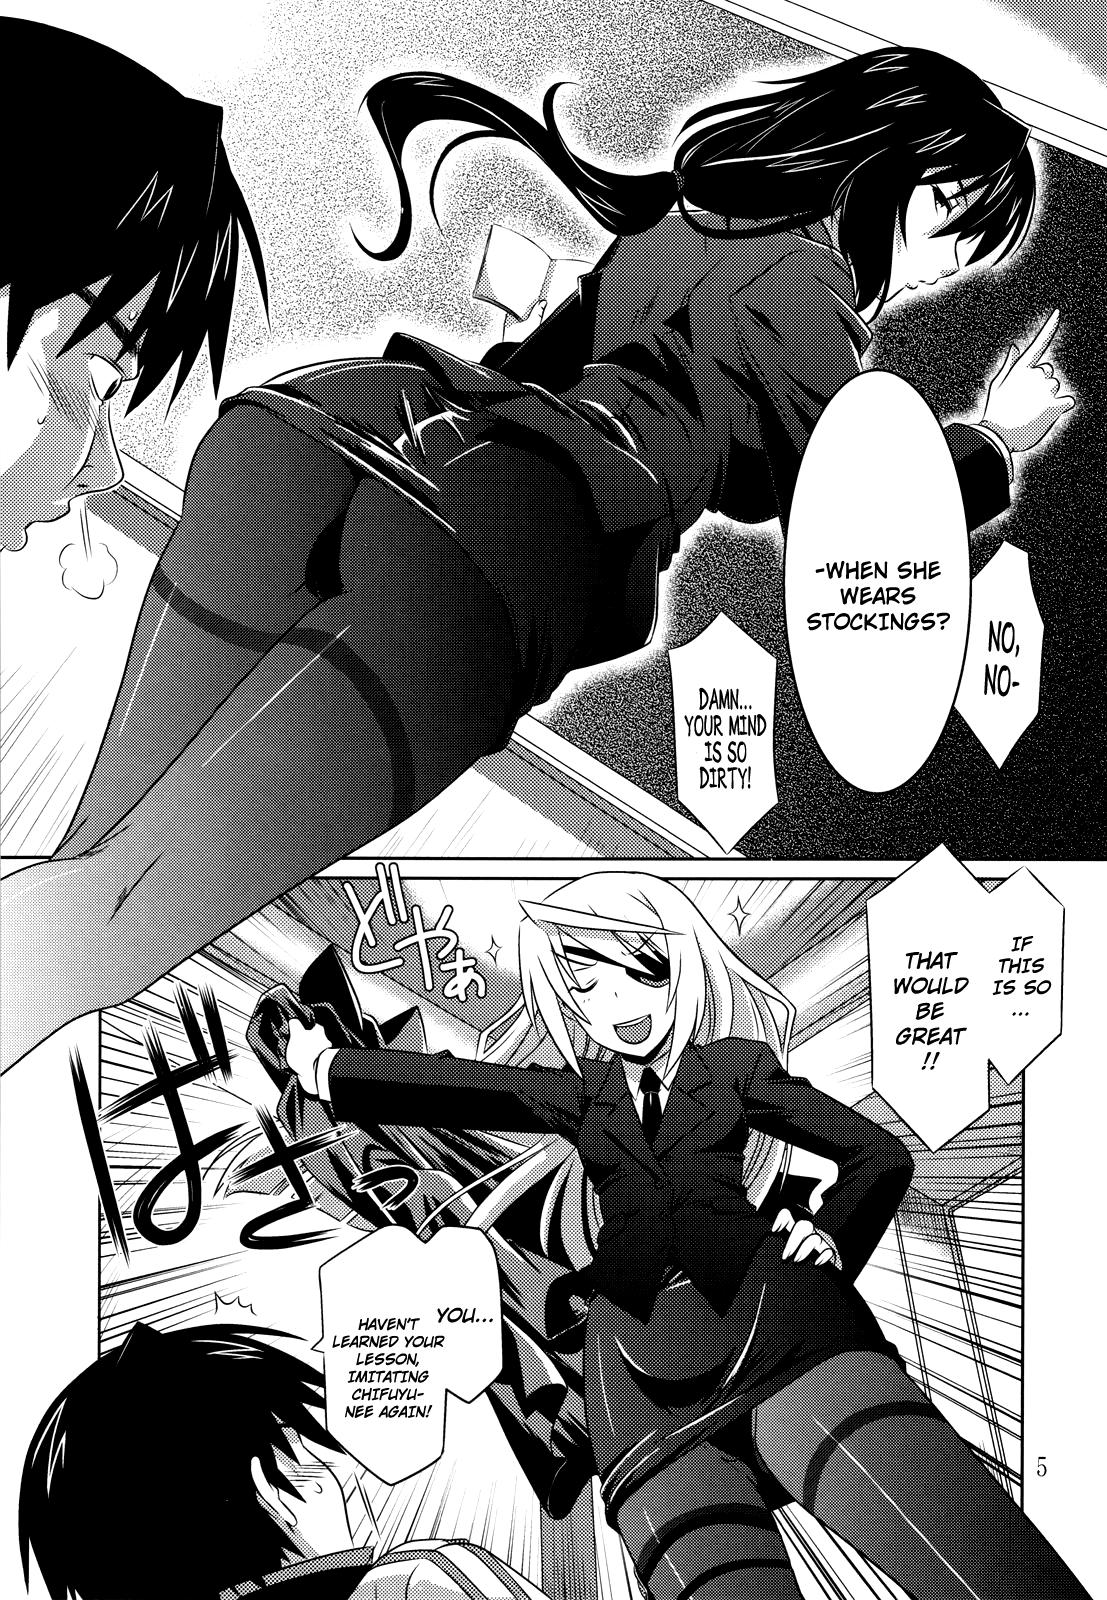 Nigeria is Incest Strategy 2 - Infinite stratos Punk - Page 4